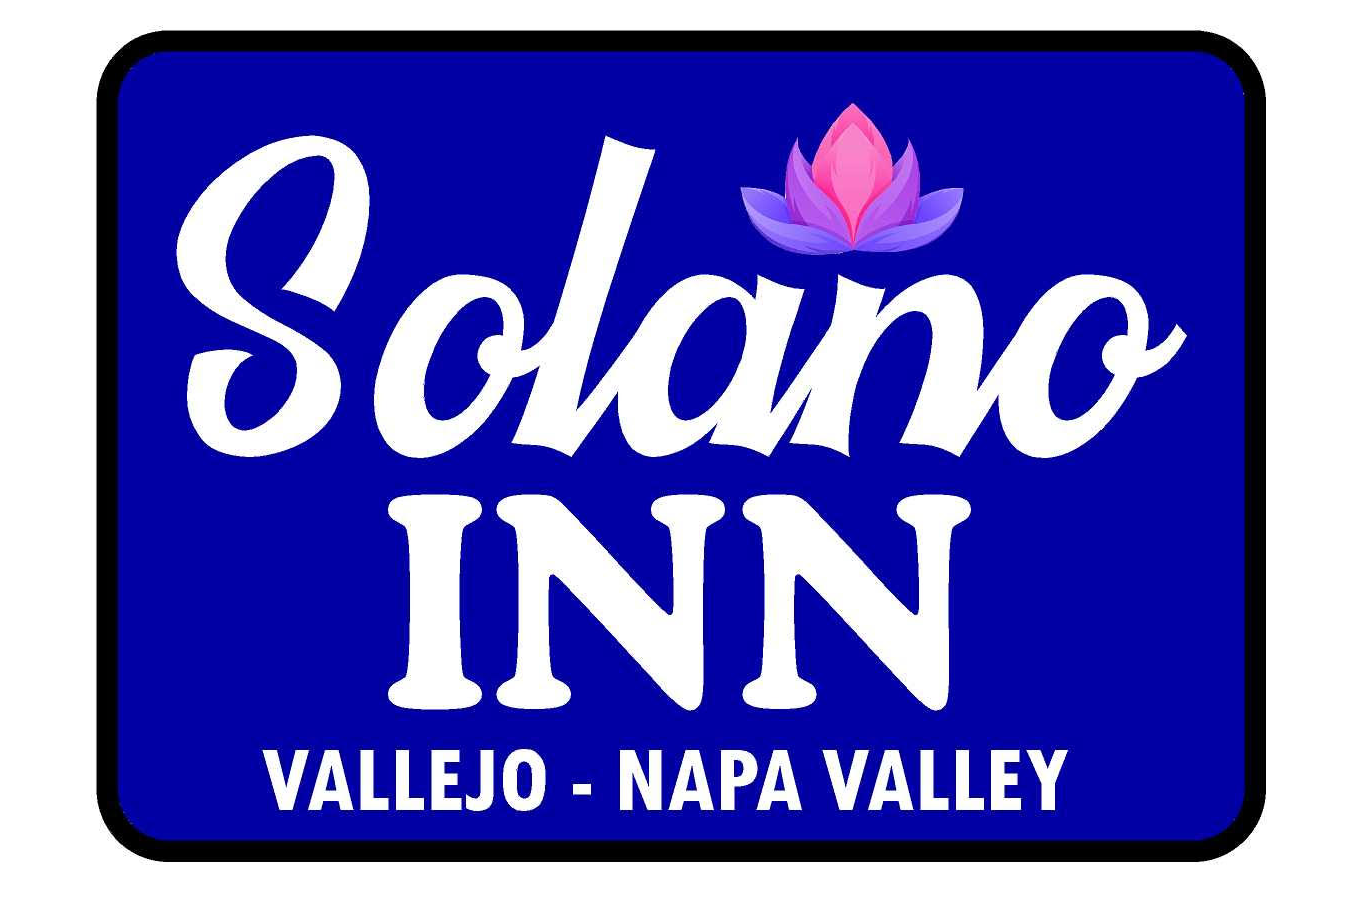 Welcome To Hotel Solano Inn